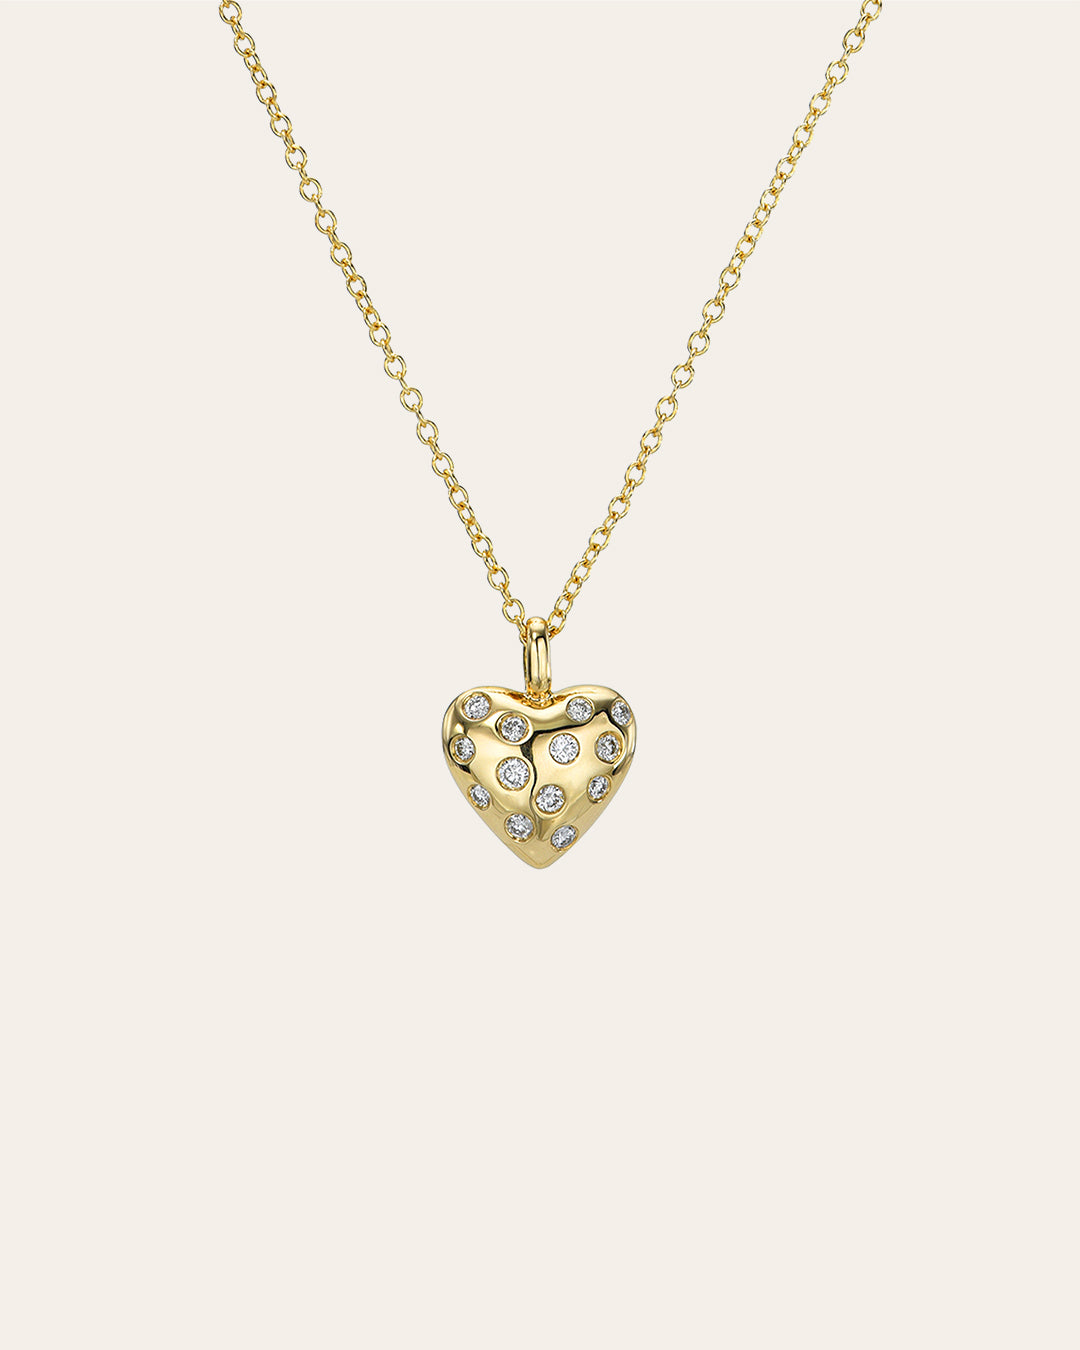 14k Gold and Diamond Domed Heart Necklace